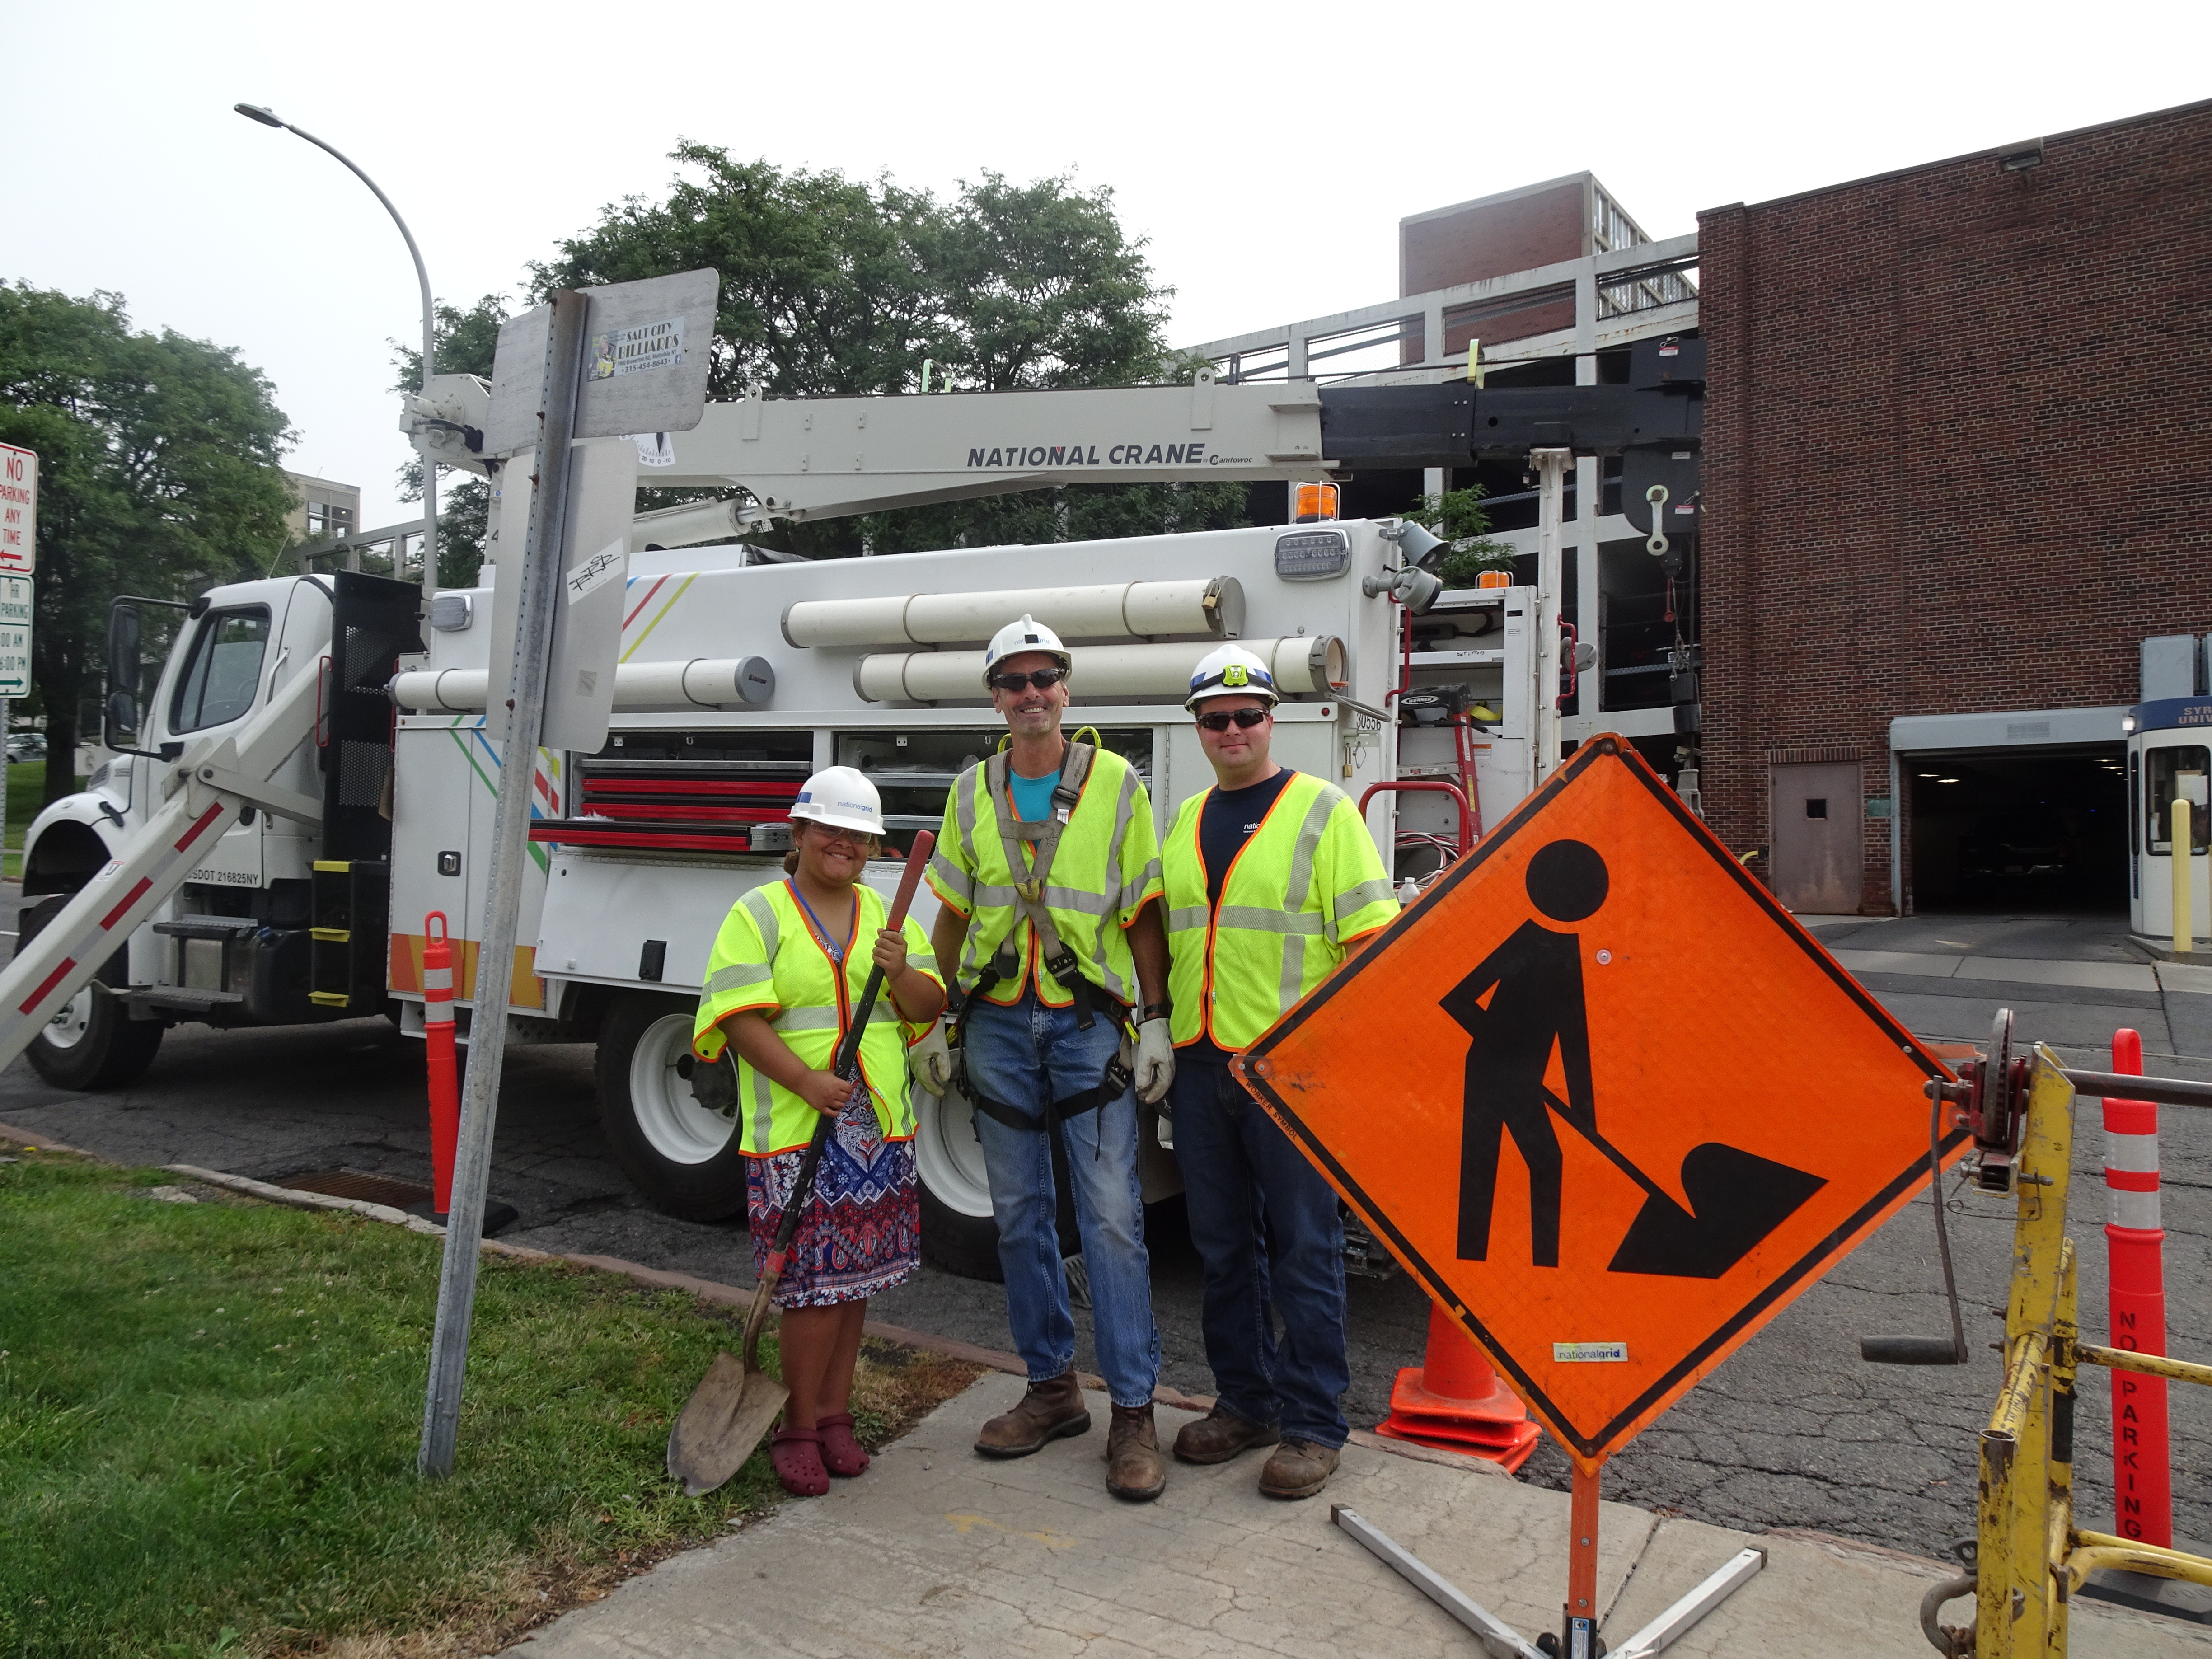 This is a photo of a student standing in a safety vest and hard hat alongside two National Grid employees, in front of a National Grid truck.